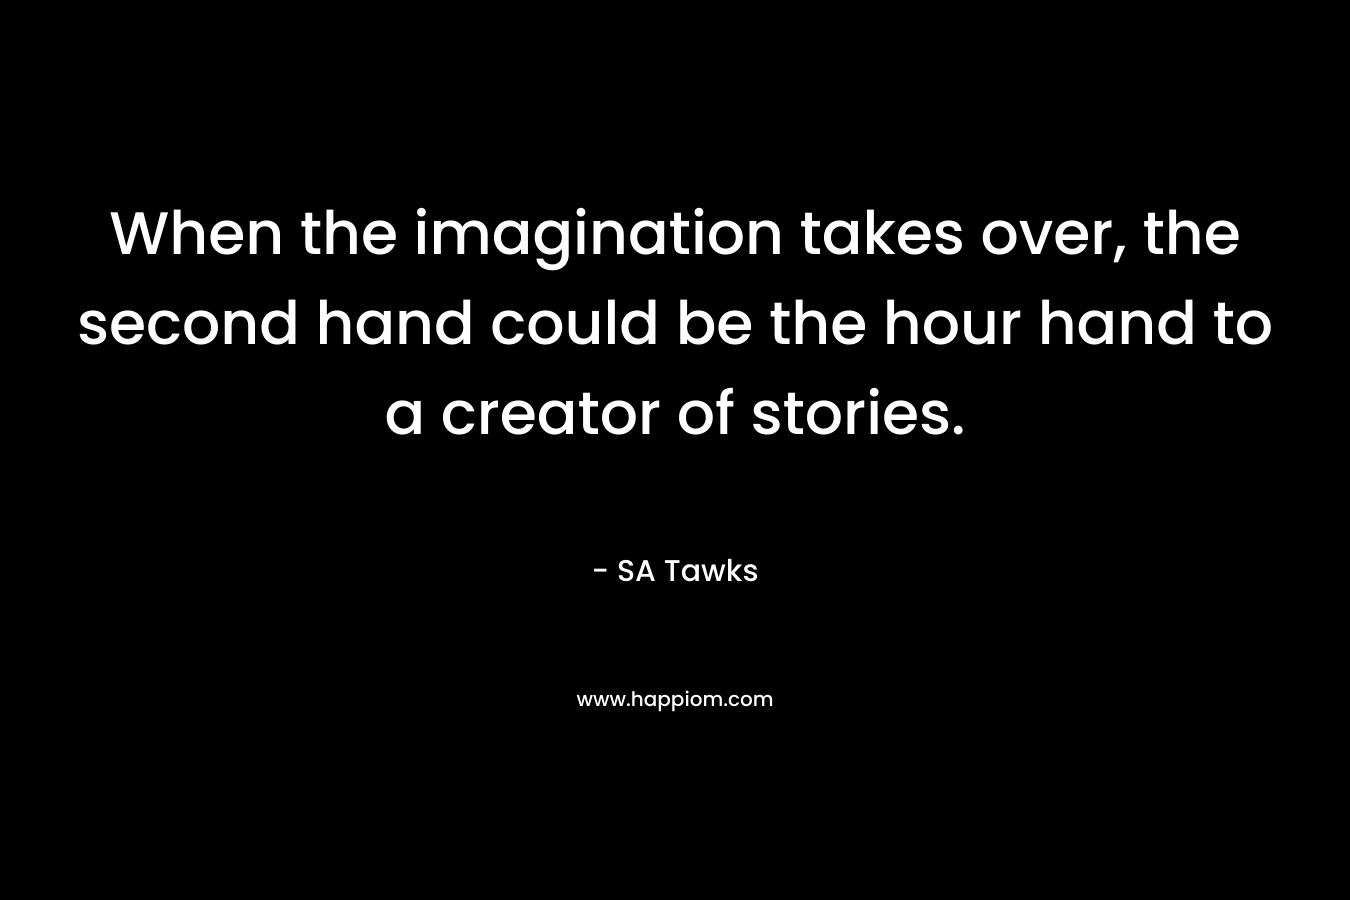 When the imagination takes over, the second hand could be the hour hand to a creator of stories.